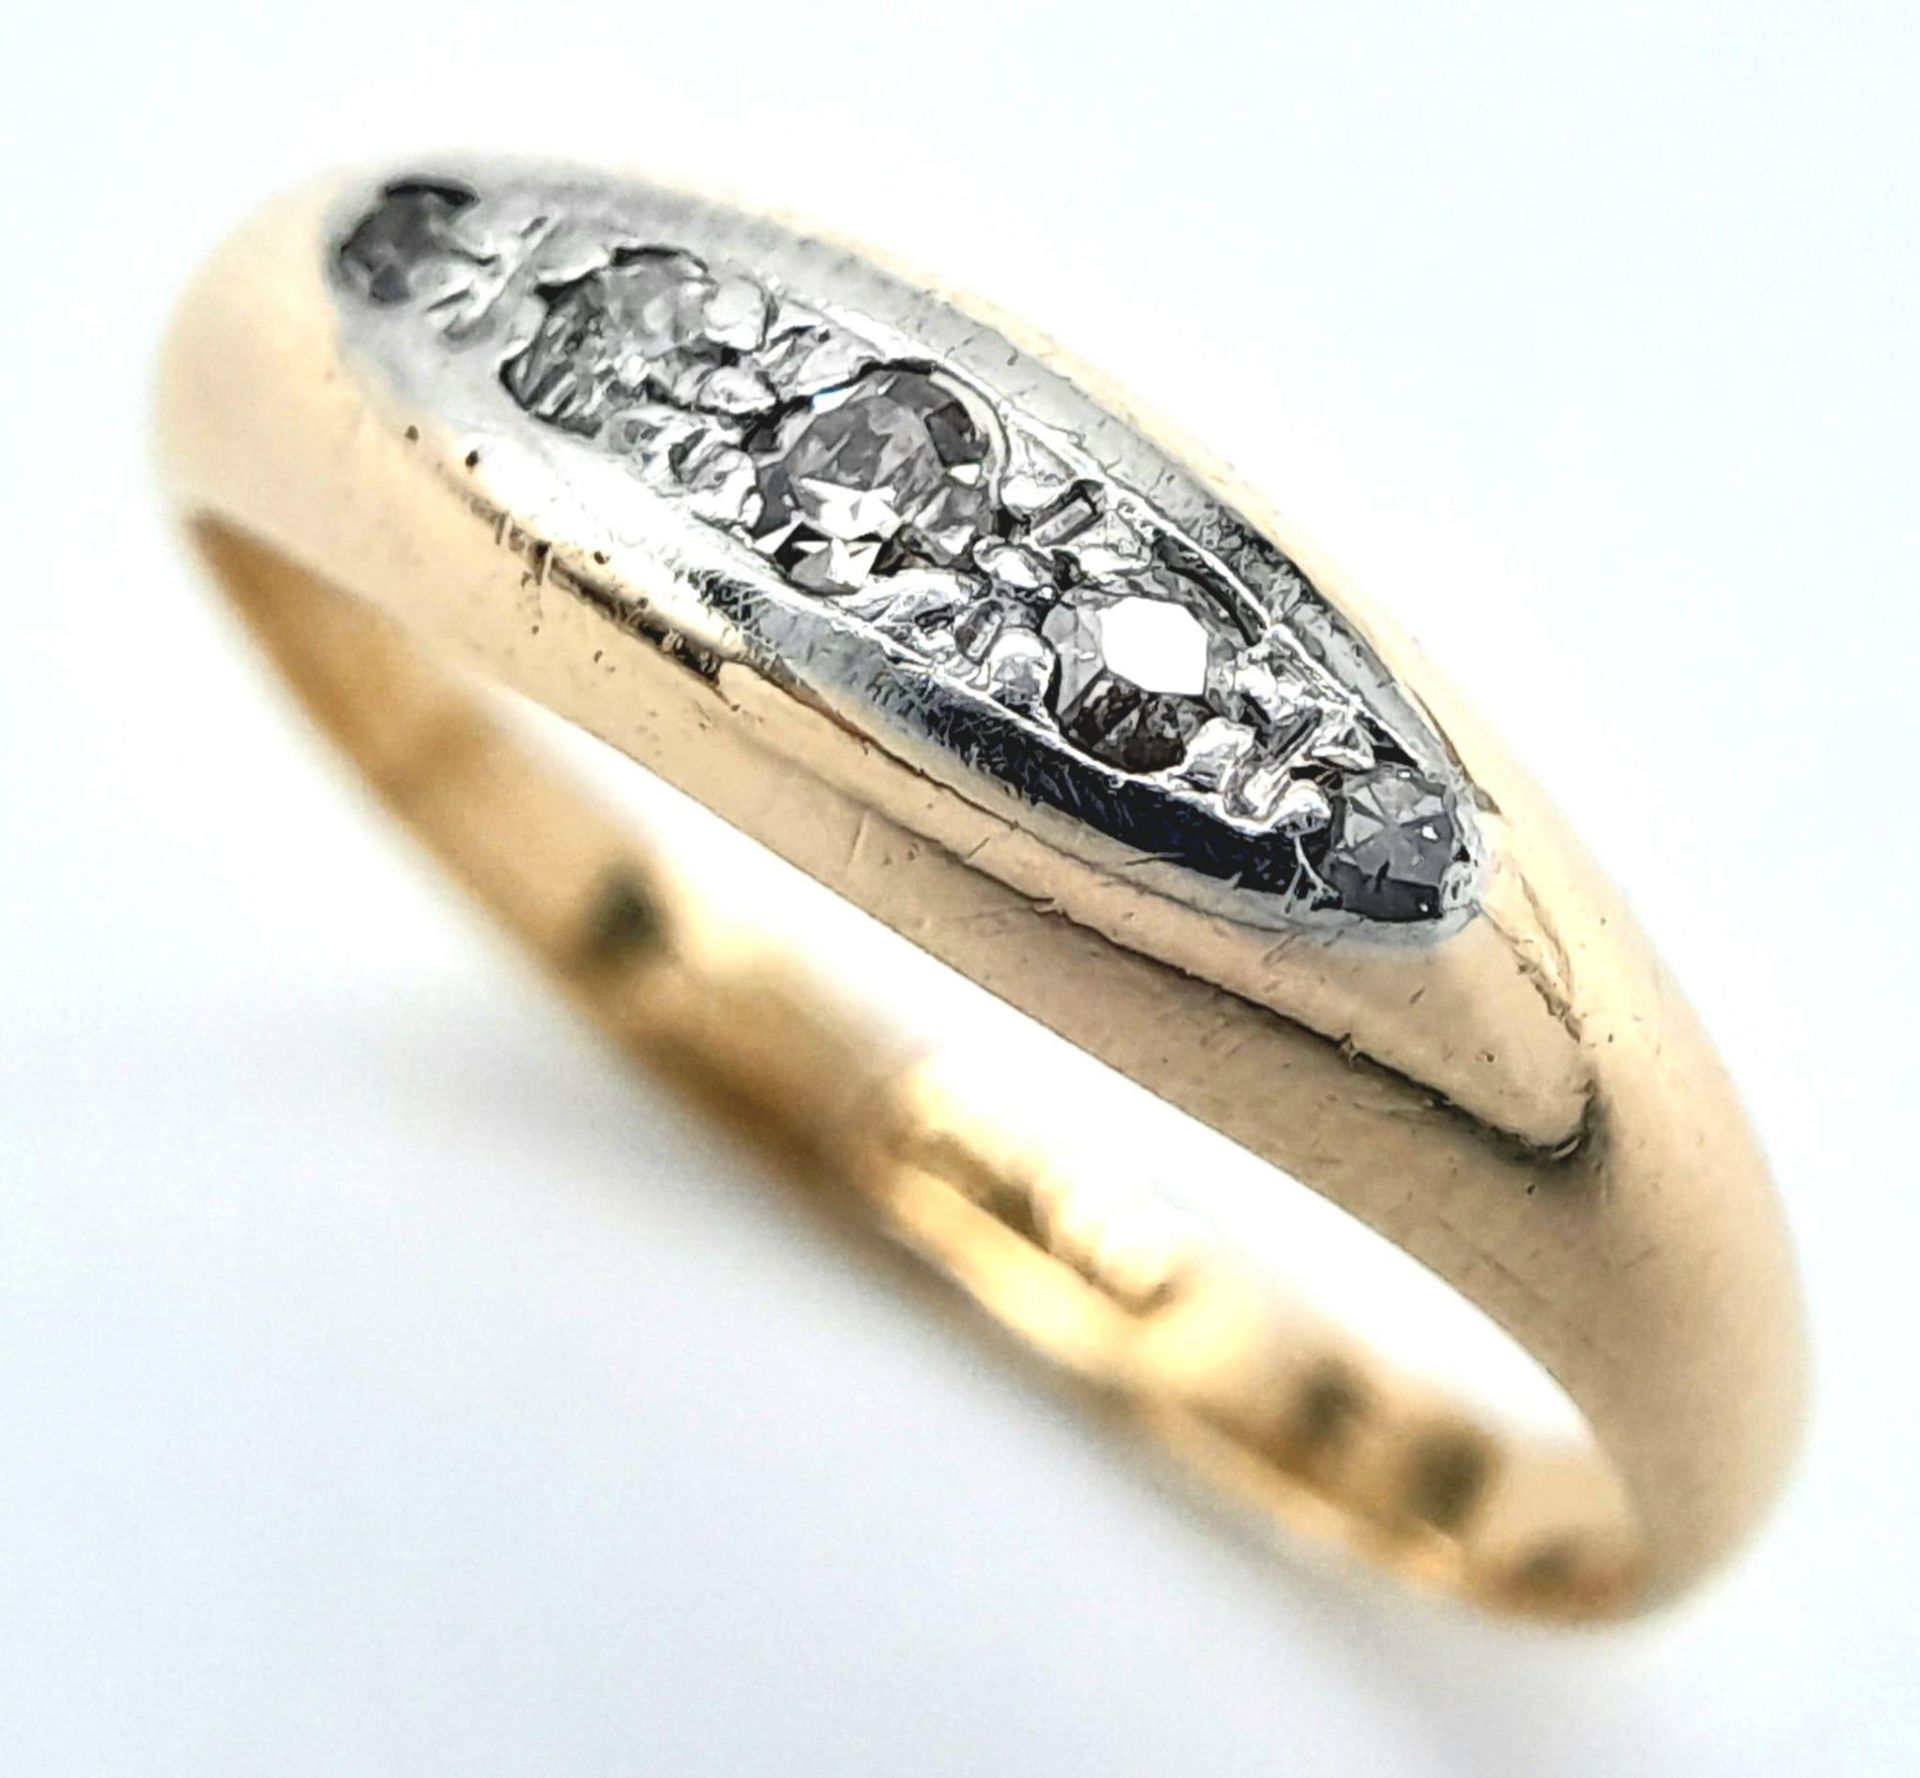 An 18K Yellow Gold and Platinum Vintage Diamond Ring. Size G, 1.5 total weight. Ref: 8452